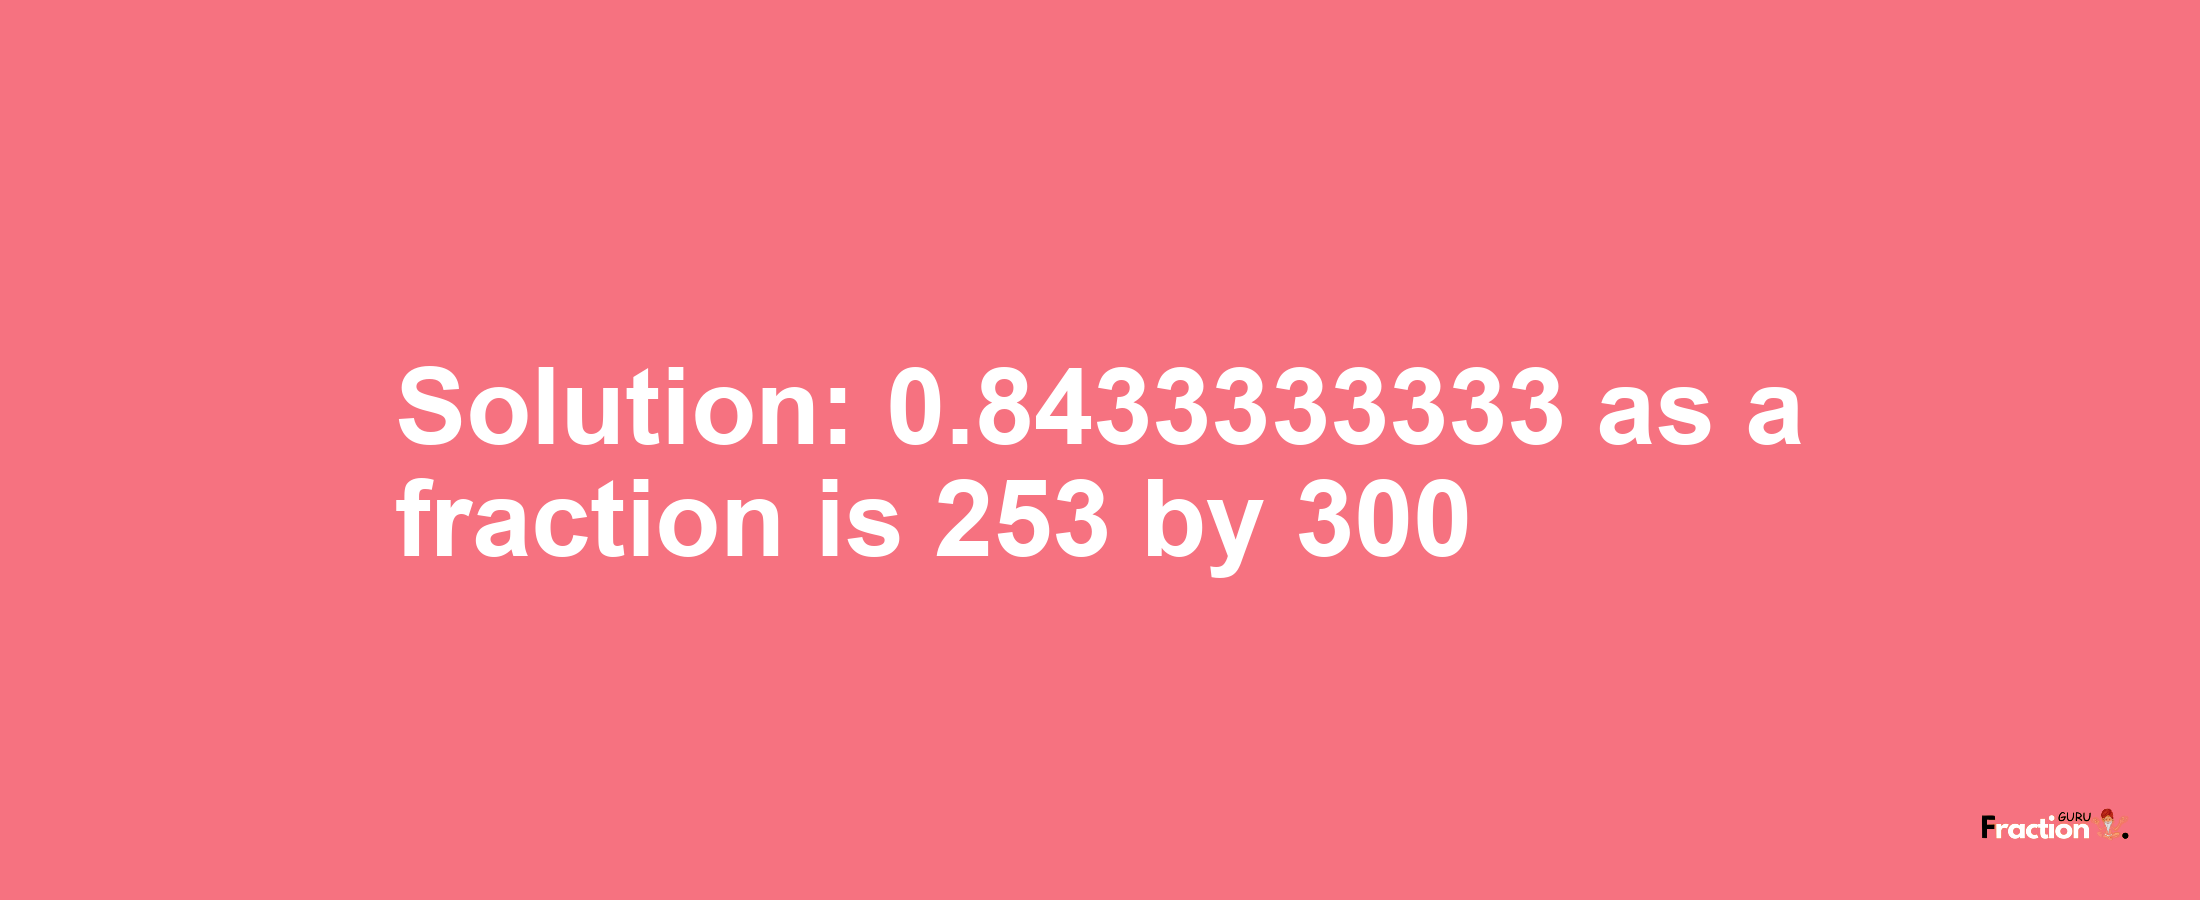 Solution:0.8433333333 as a fraction is 253/300